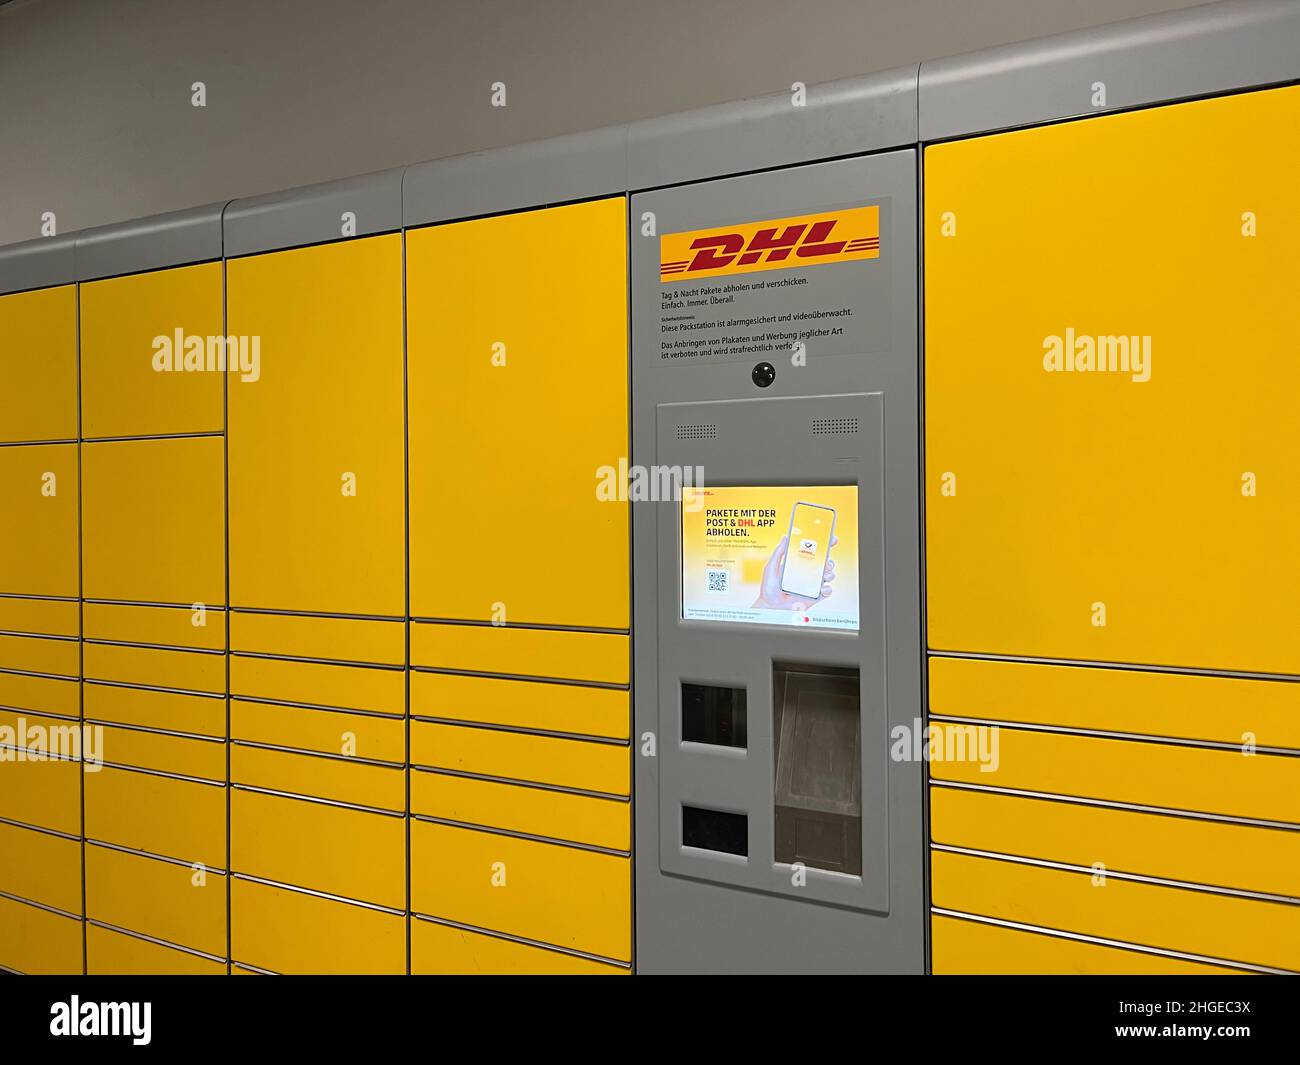 Dhl Package Packet High Resolution Stock Photography and Images - Alamy